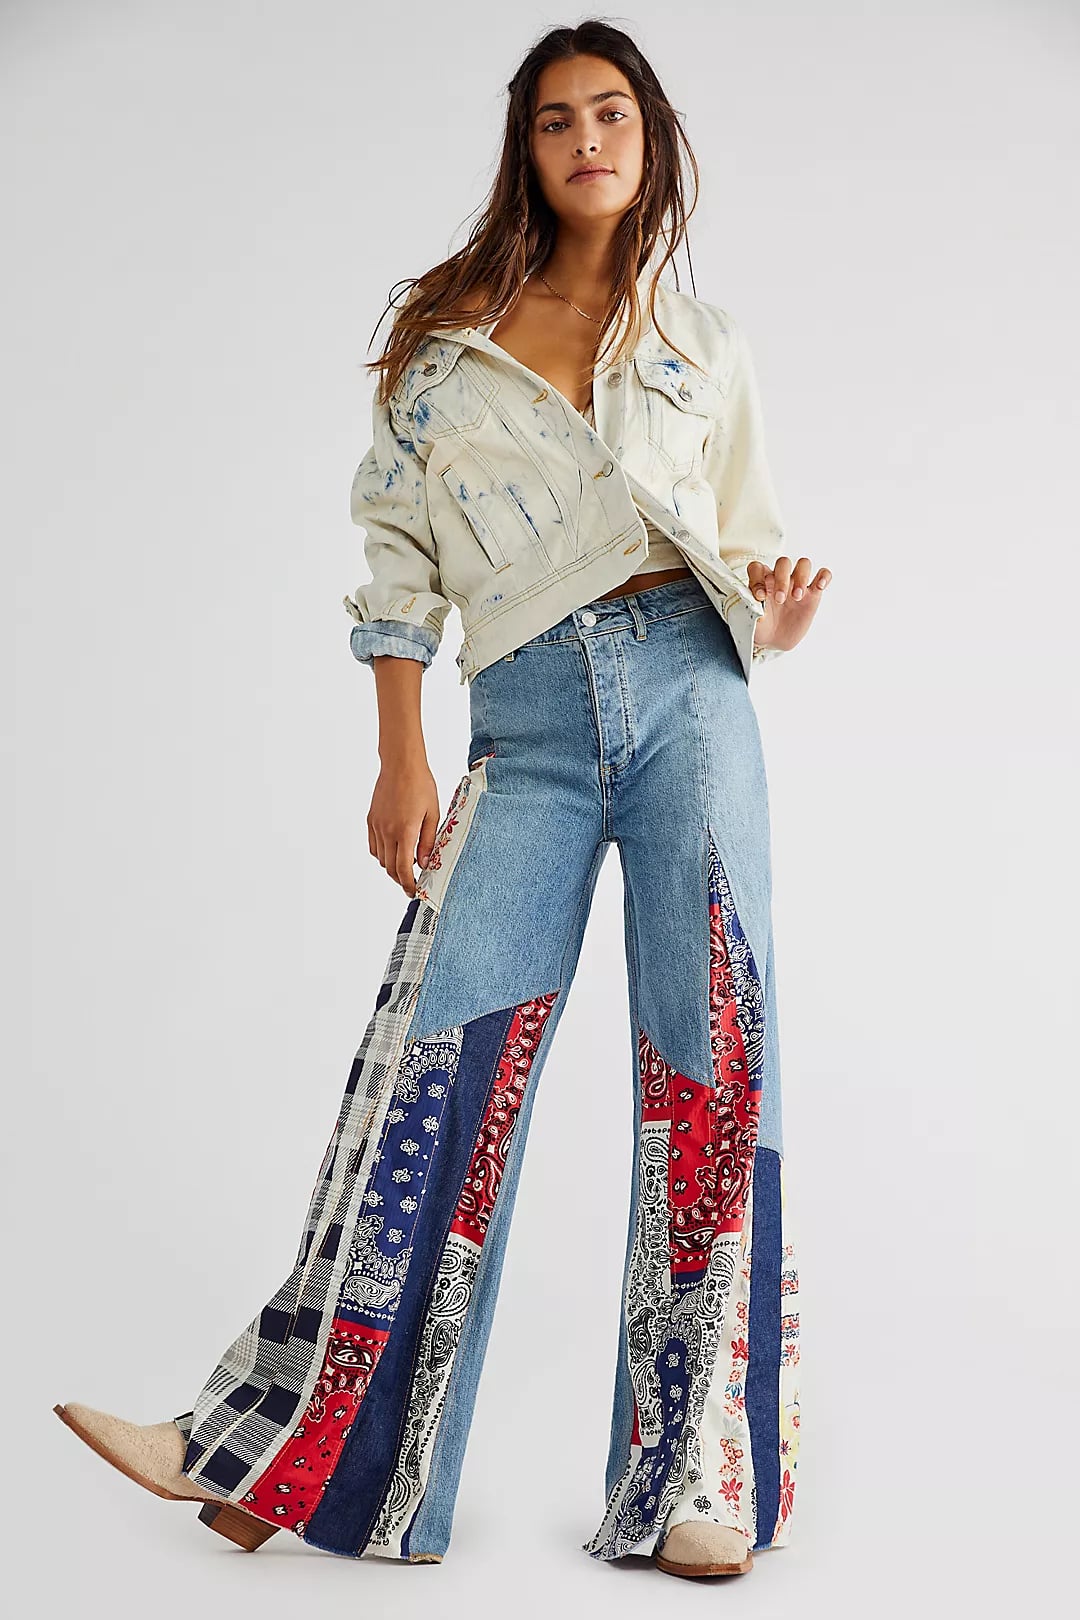 Top-Rated Clothes From Free People | POPSUGAR Fashion